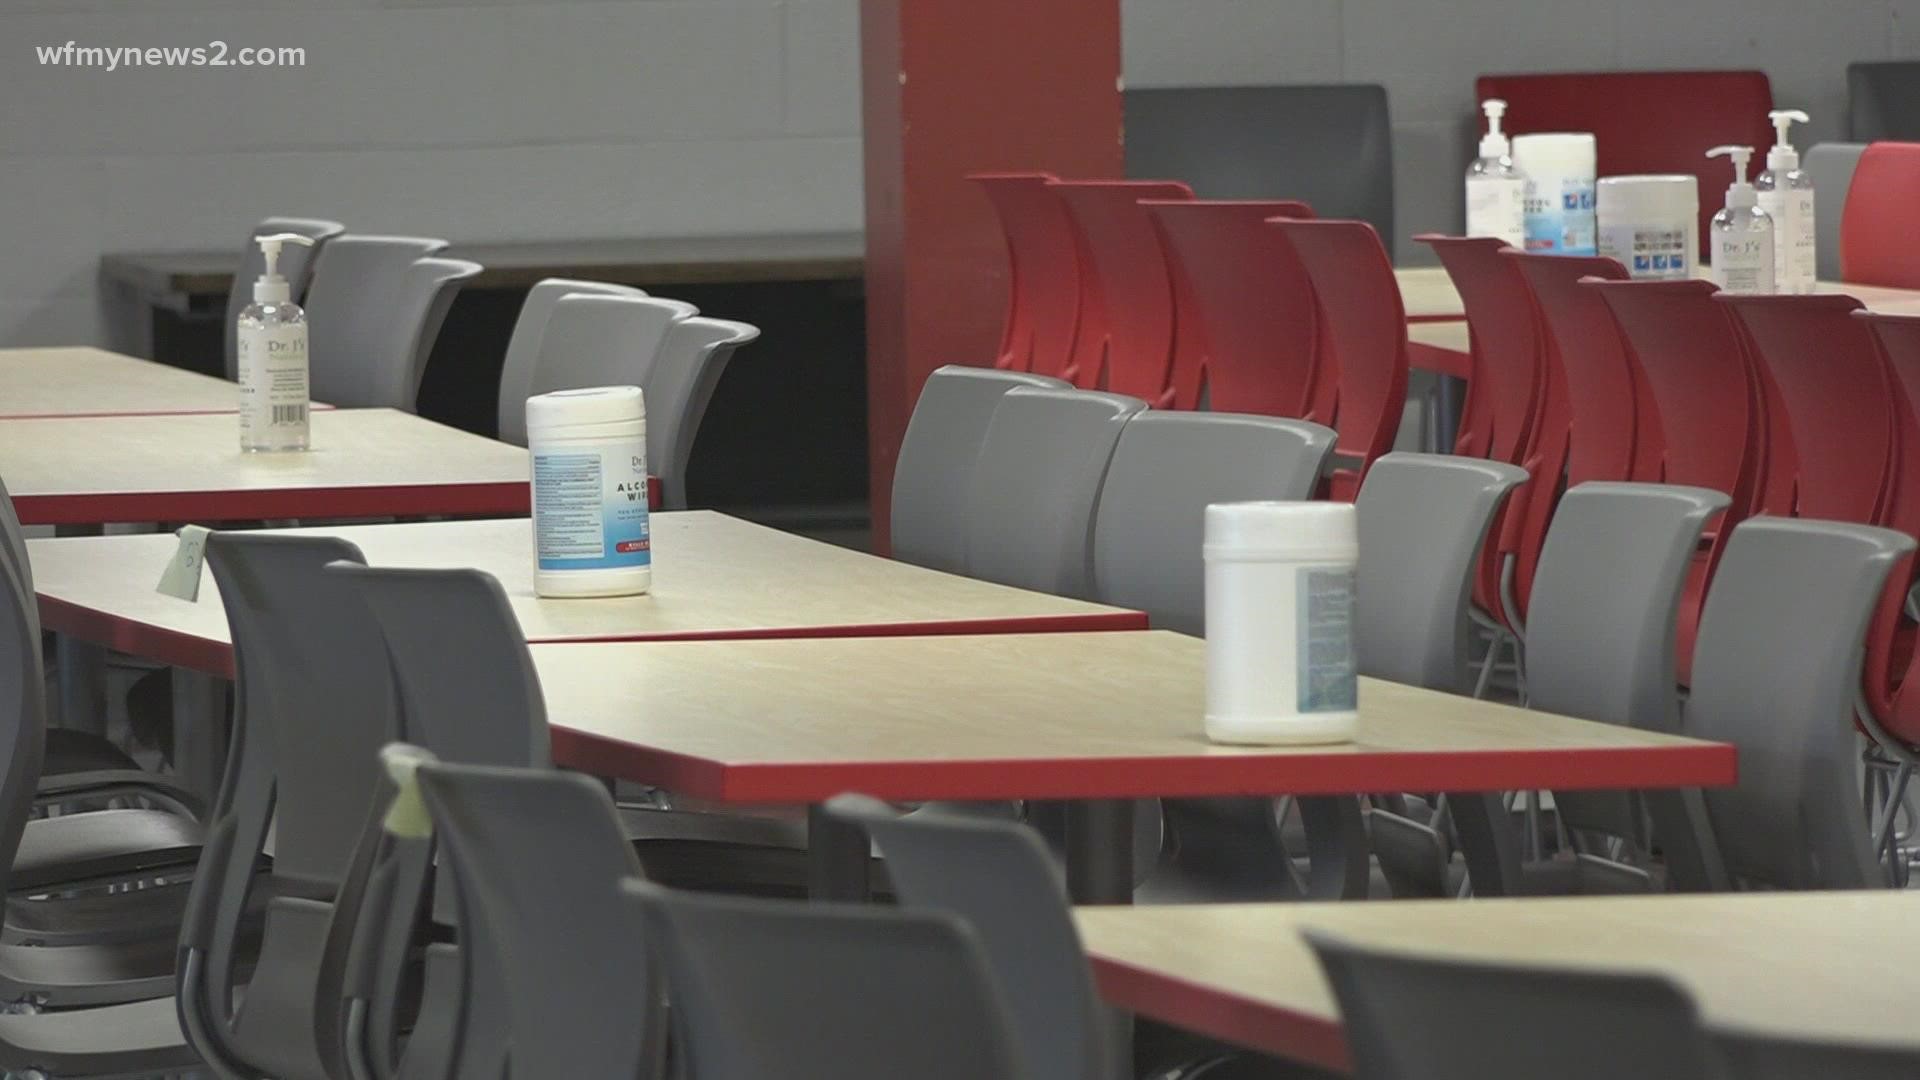 The $1.7 billion dollar bond referendum plan is part of an effort to fix dilapidated schools in Guilford County.